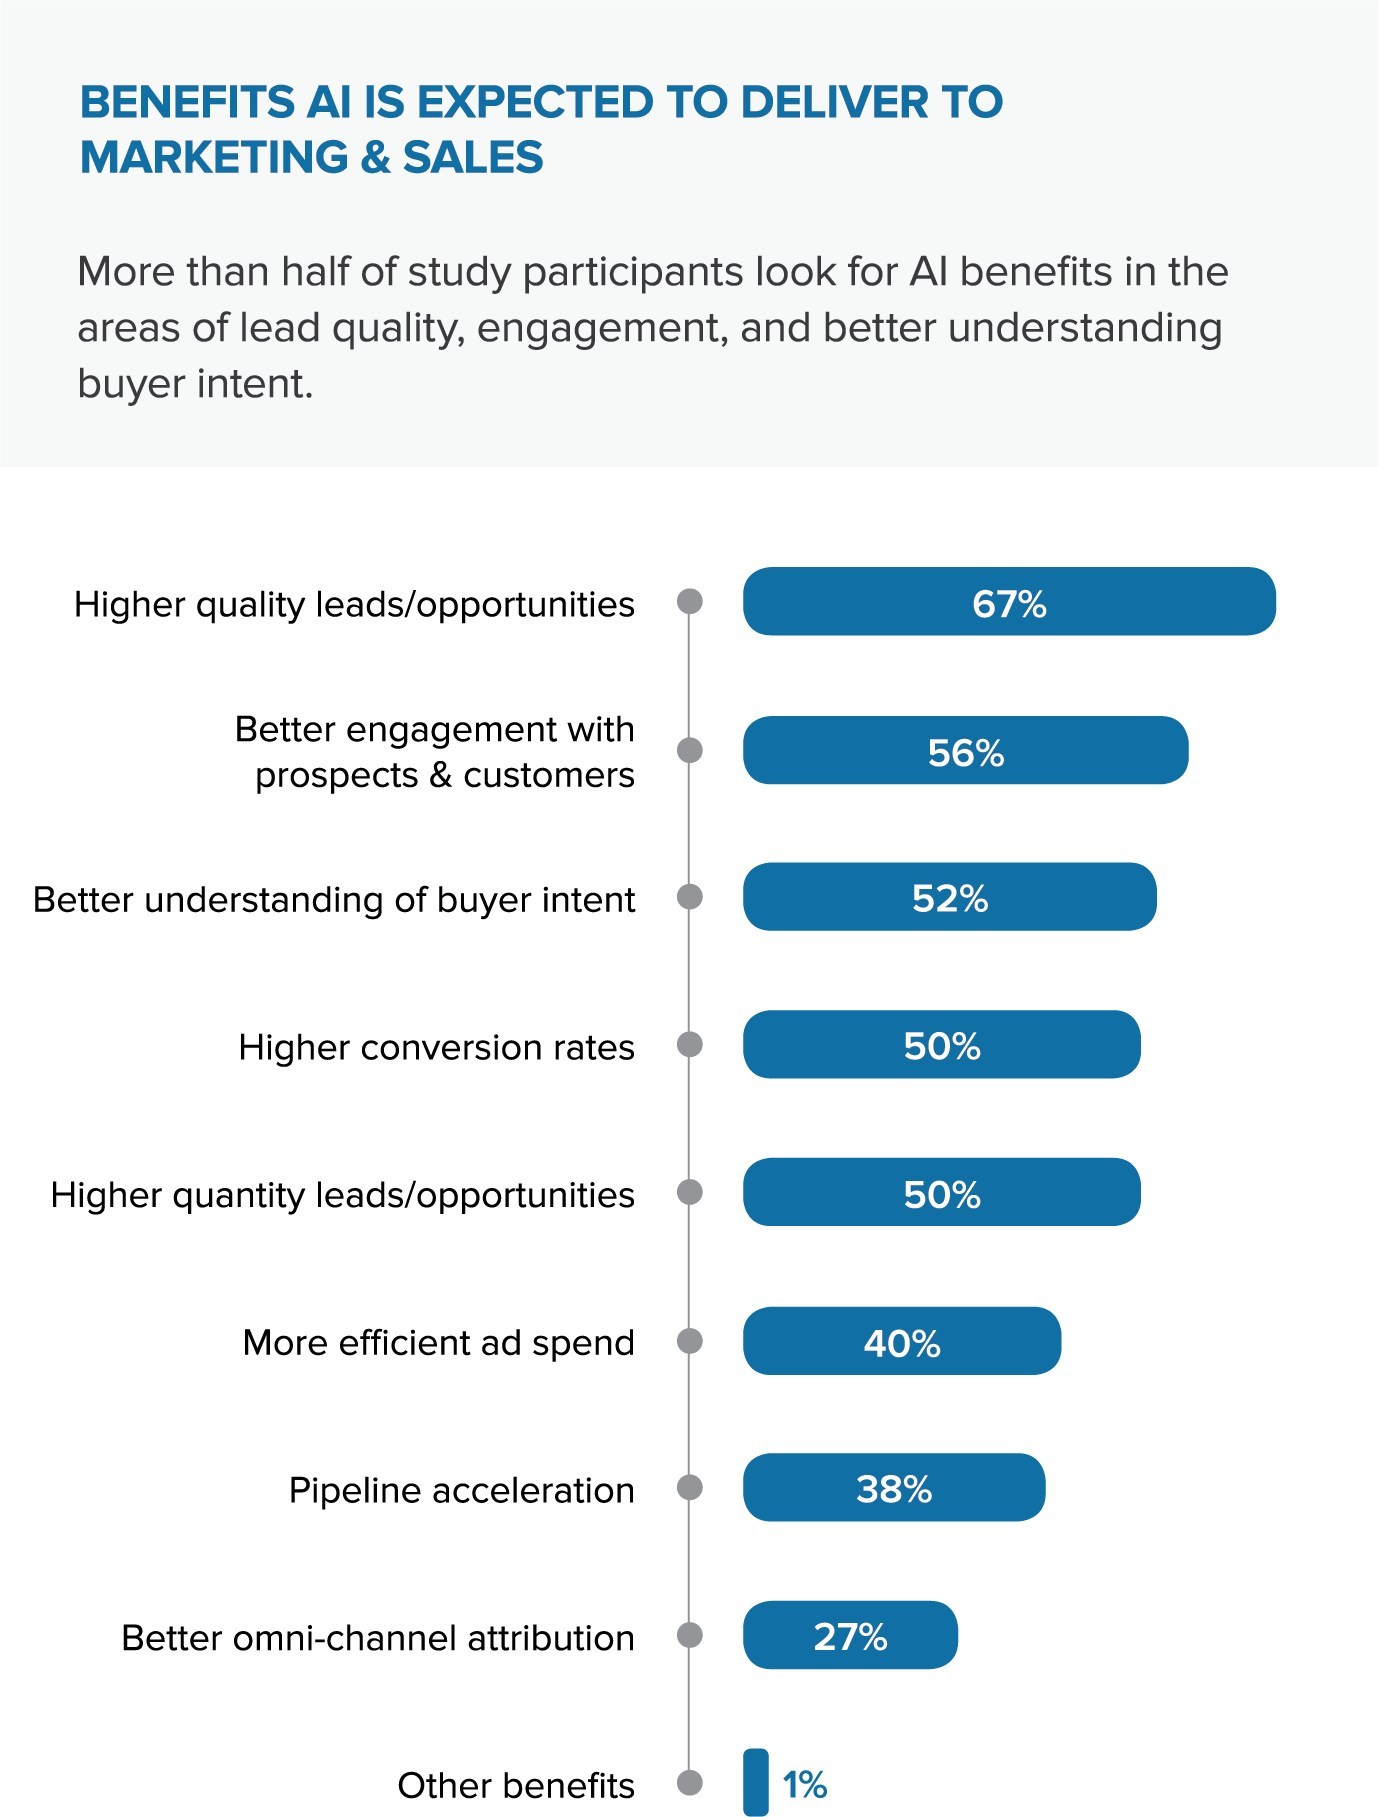 Results of a Demandbase study <a href='https://prn.to/2Ur6qMo' target='_blank'>(Source)</a> on the expected benefits of machine learning in marketing.